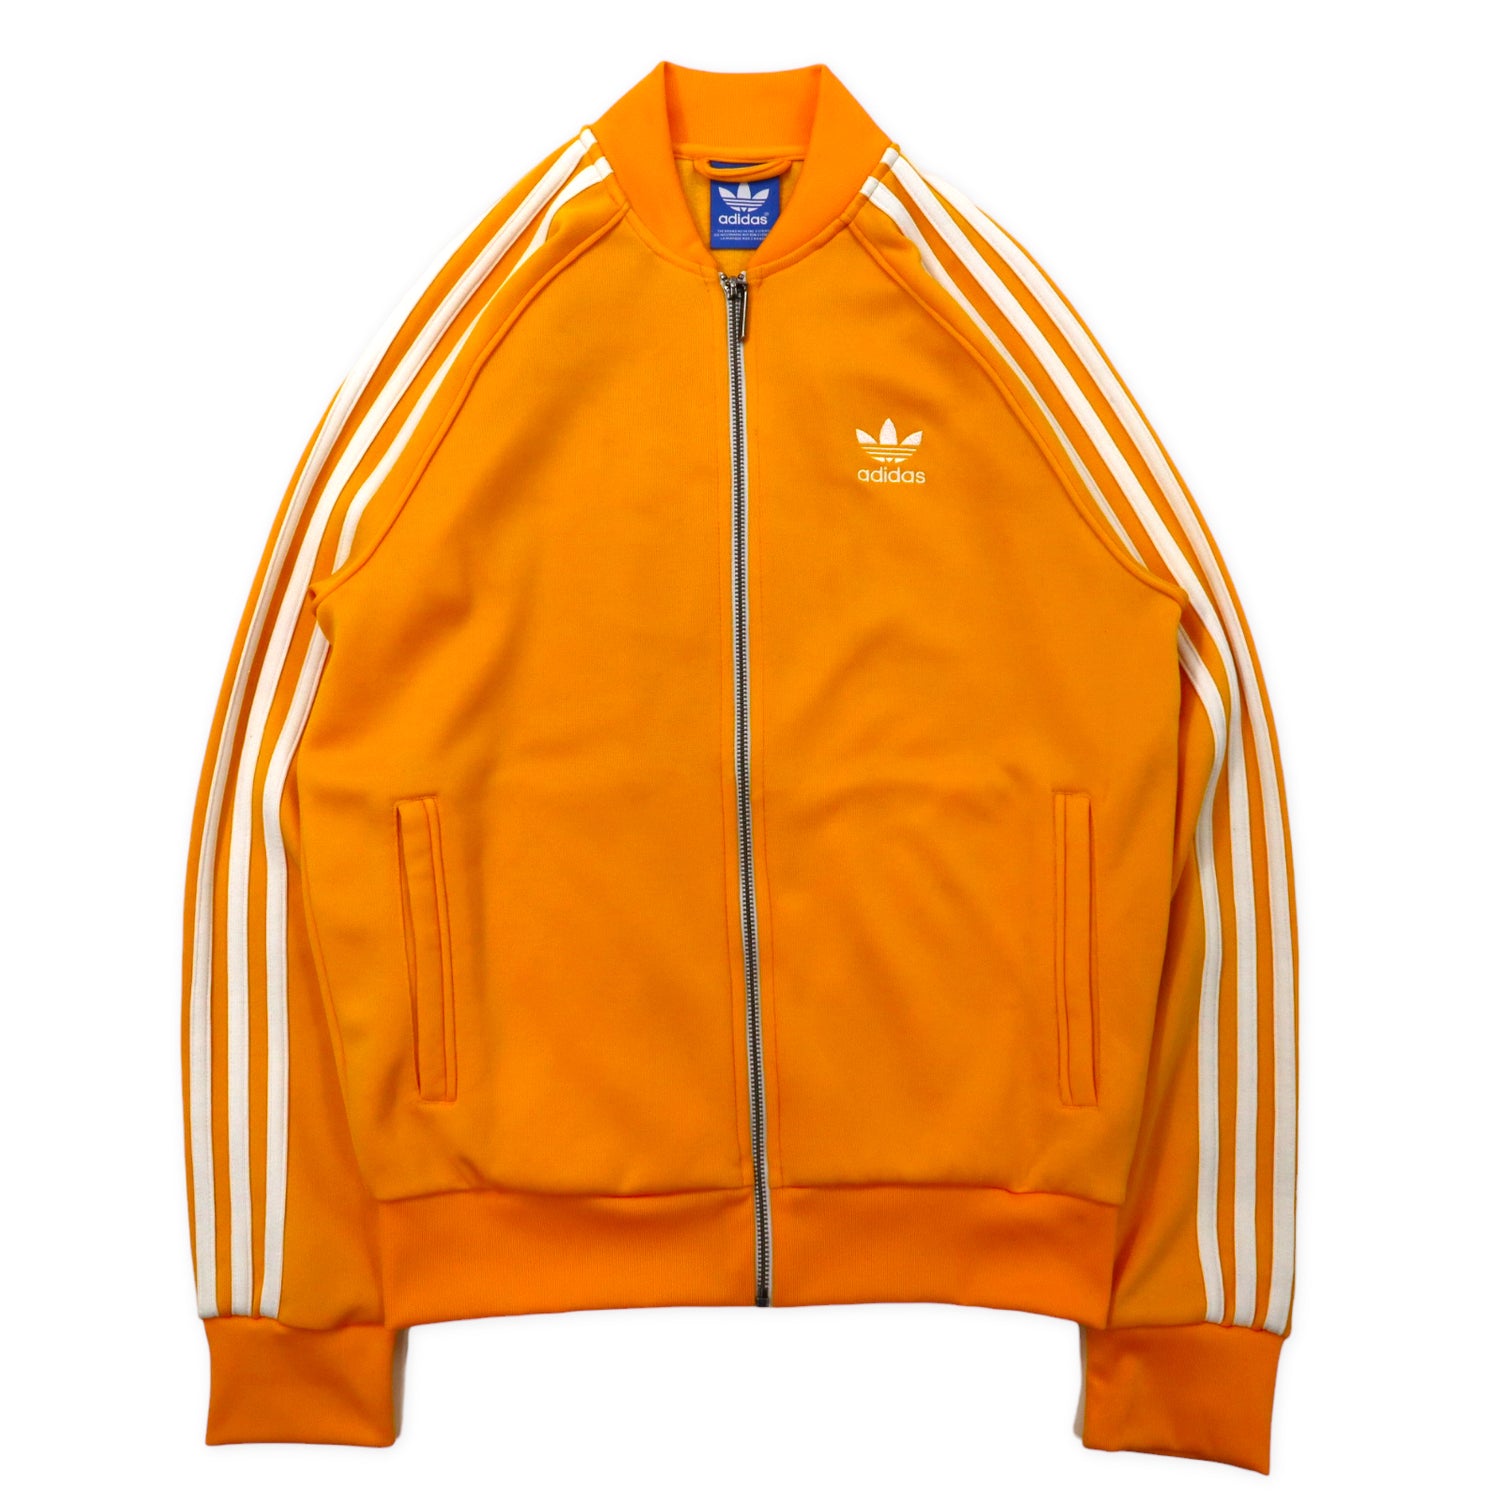 Adidas Originals ATP Super Star TRACK Jersey L Yellow 3 STRIPED Trefile  Logo Embroidery SST TRACK TOP